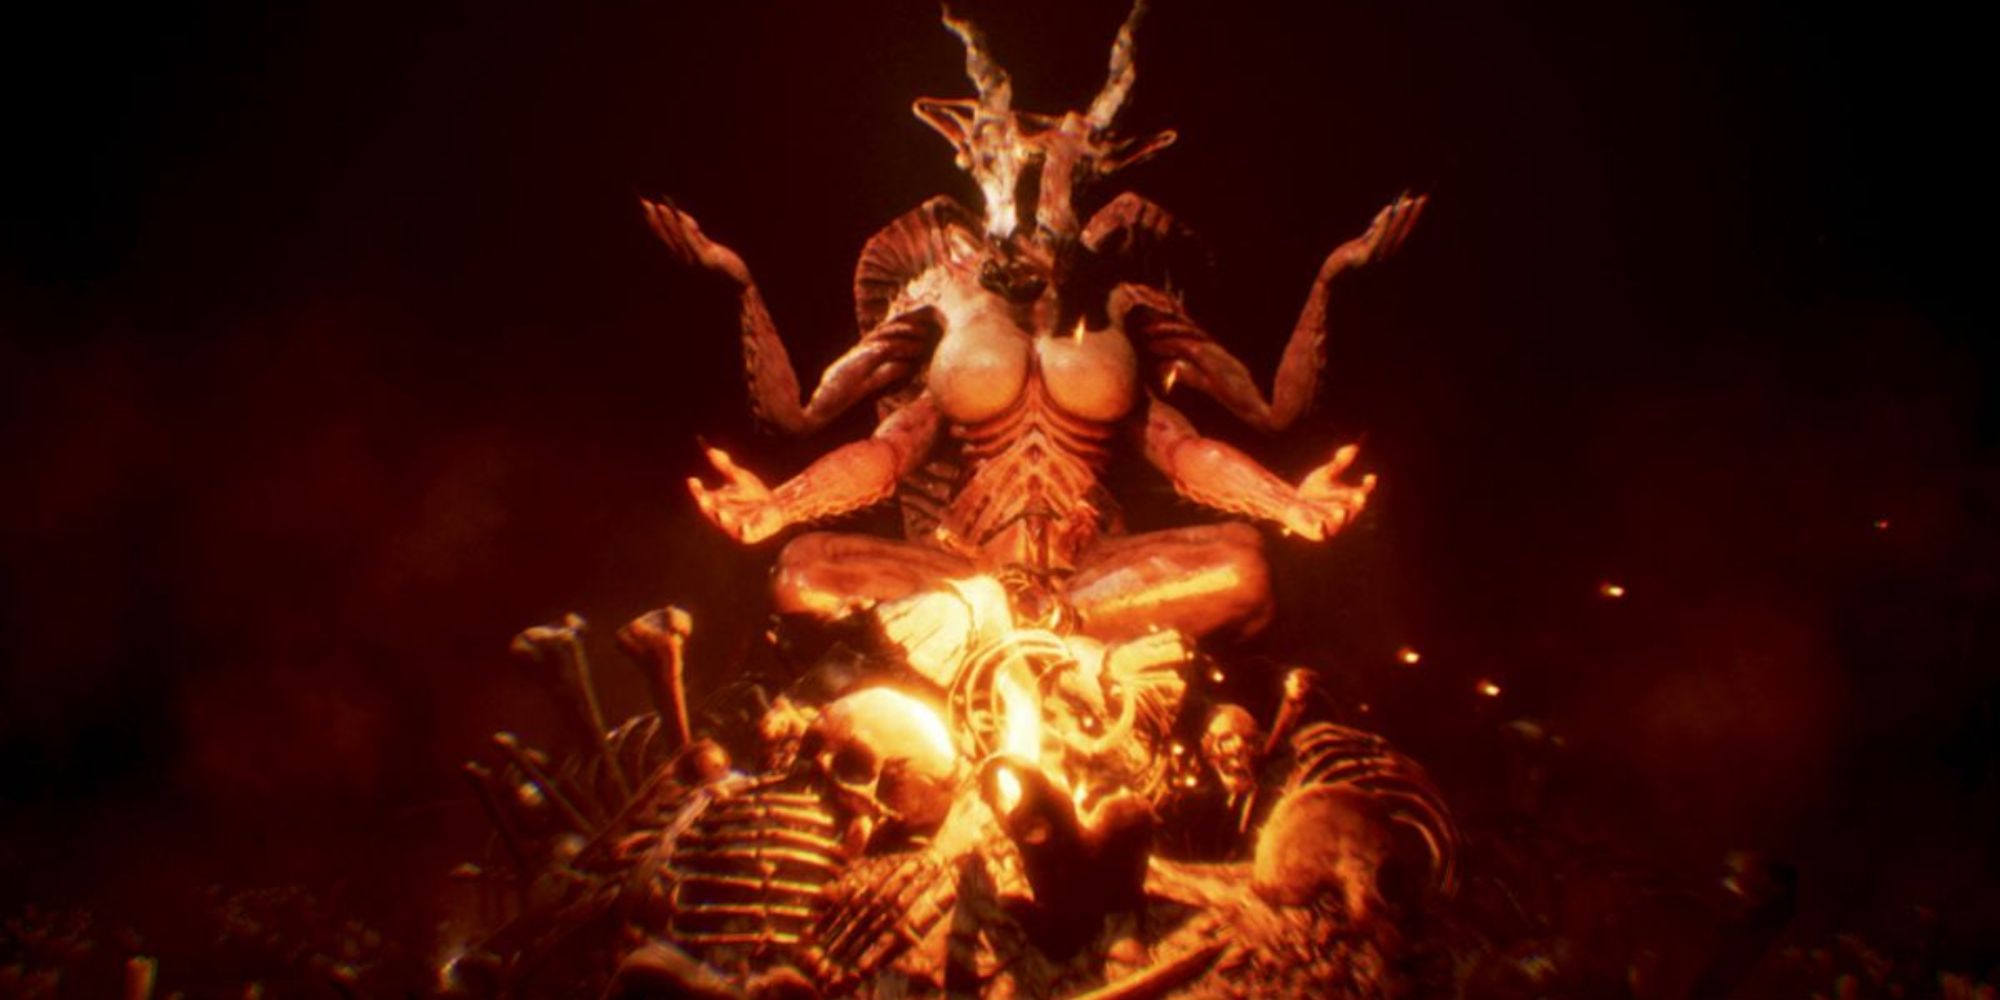 agony baphomet posing on pile of bodies